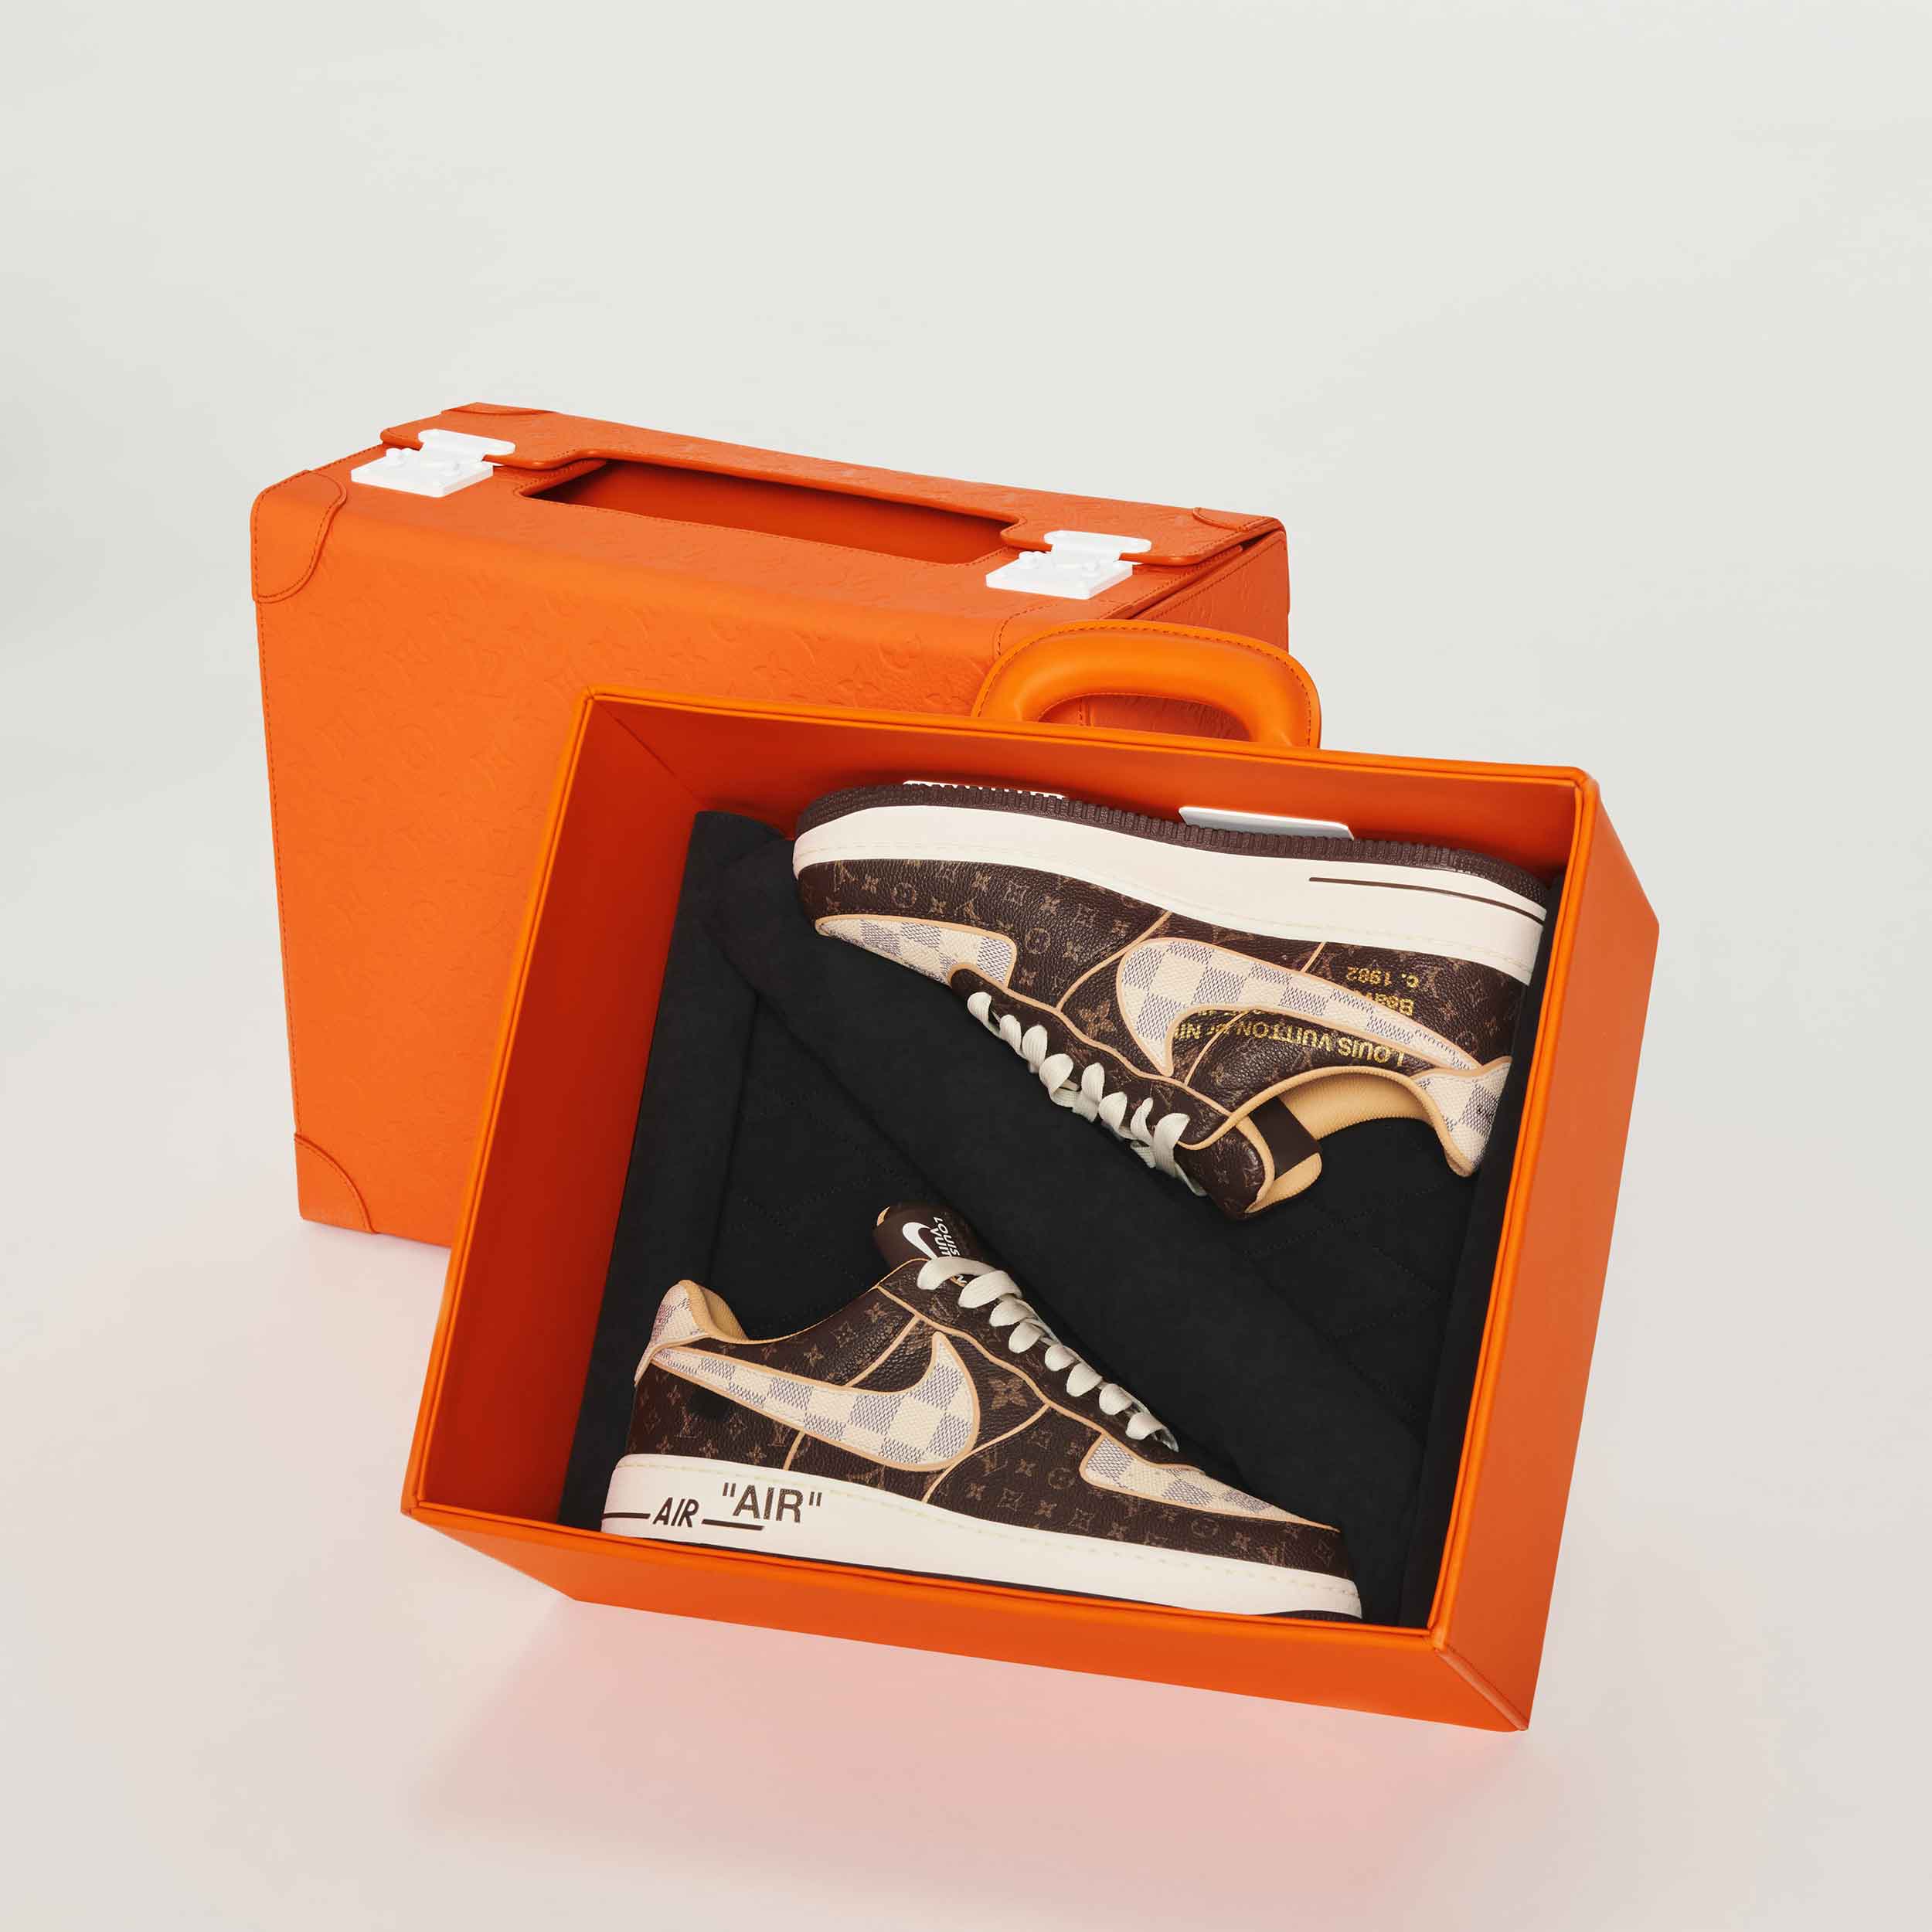 Virgil Abloh limited edition sneaker collection fetch $25 million